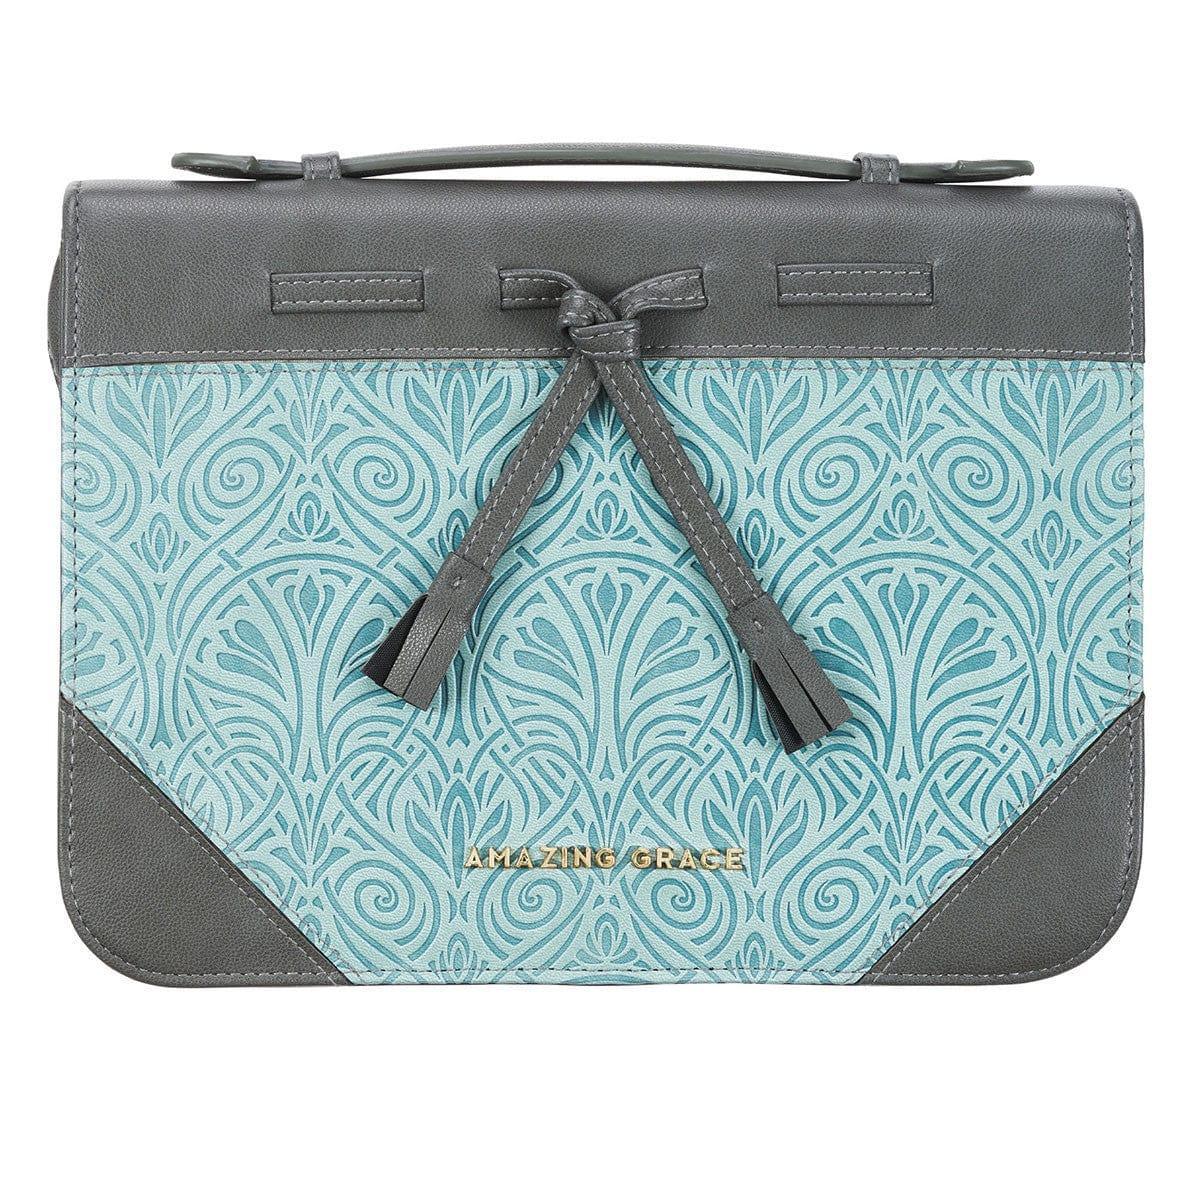 Amazing Grace Gray and Turquoise Faux Leather Fashion Bible Cover with Tassels - Pura Vida Books